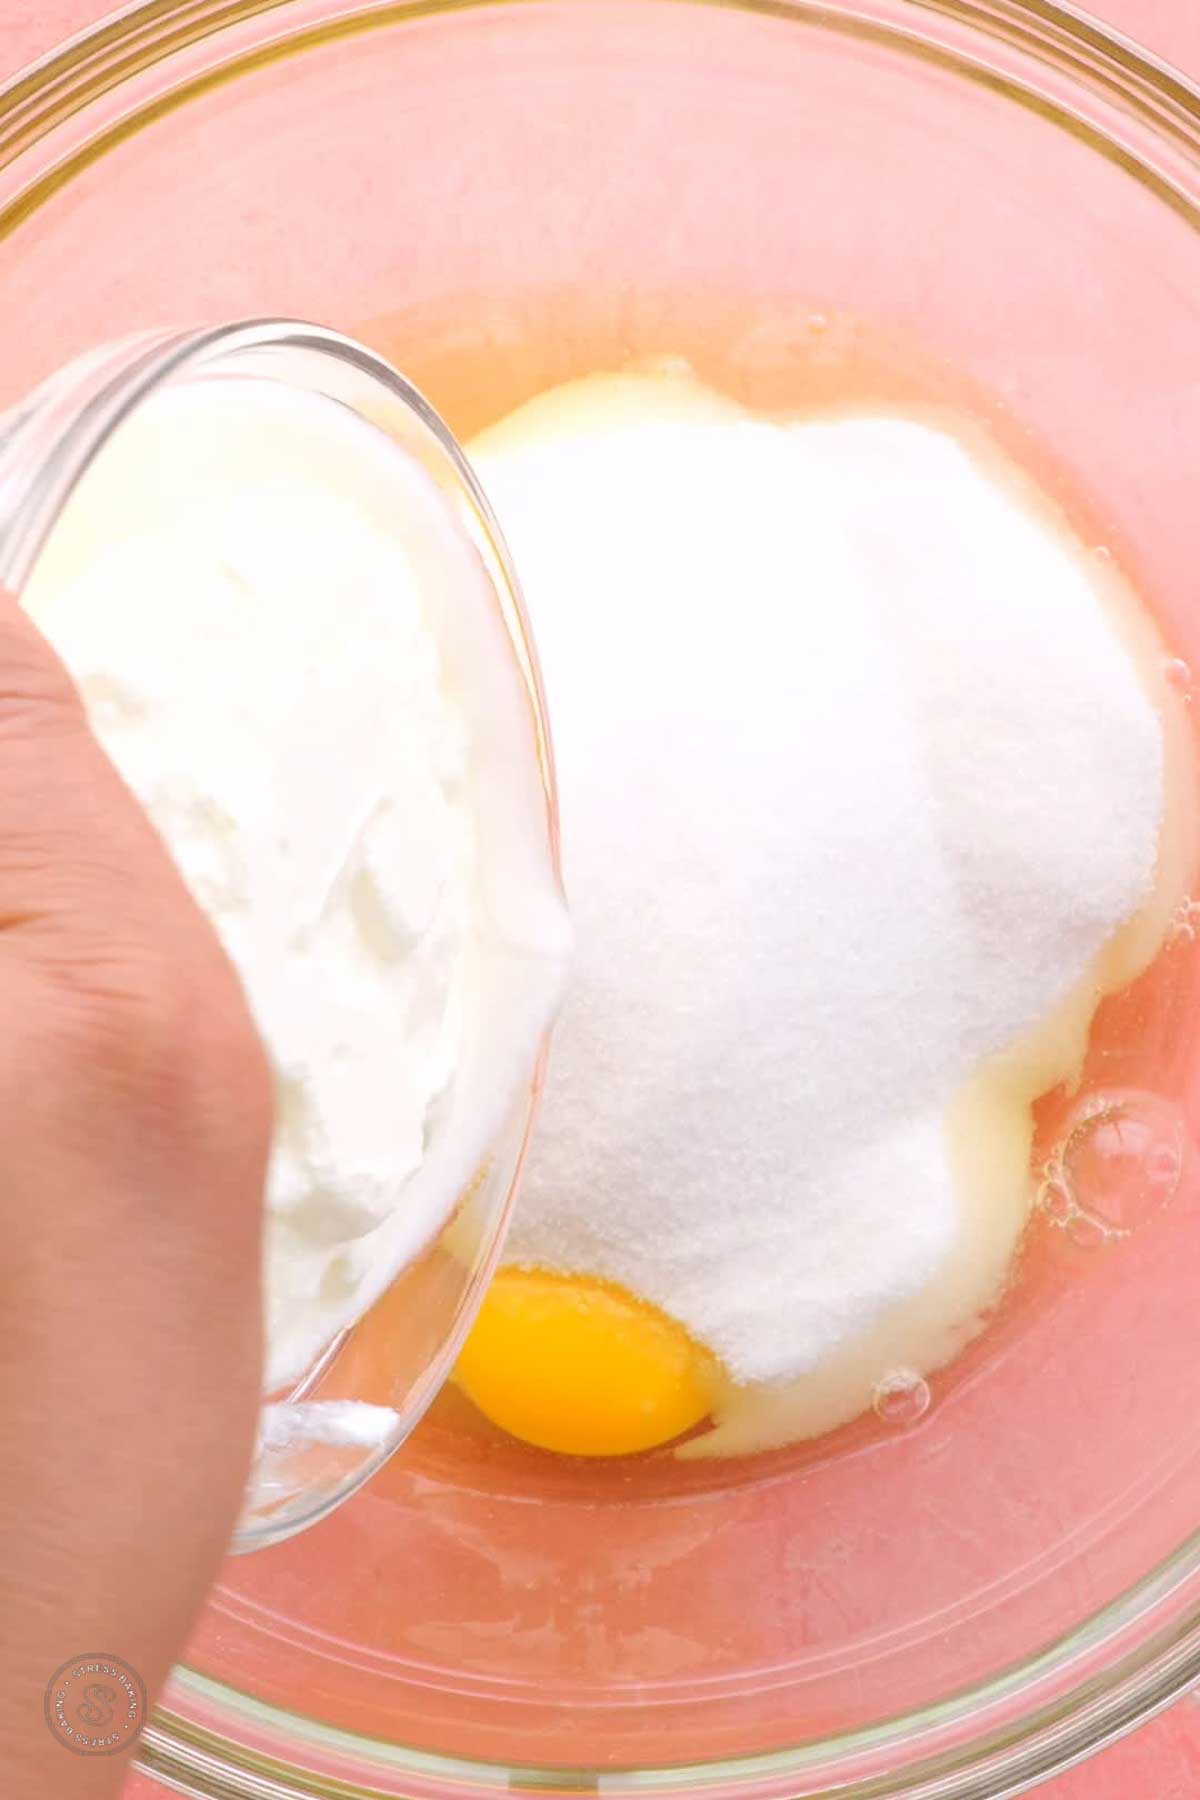 Yogurt being poured into a bowl of eggs and sugar